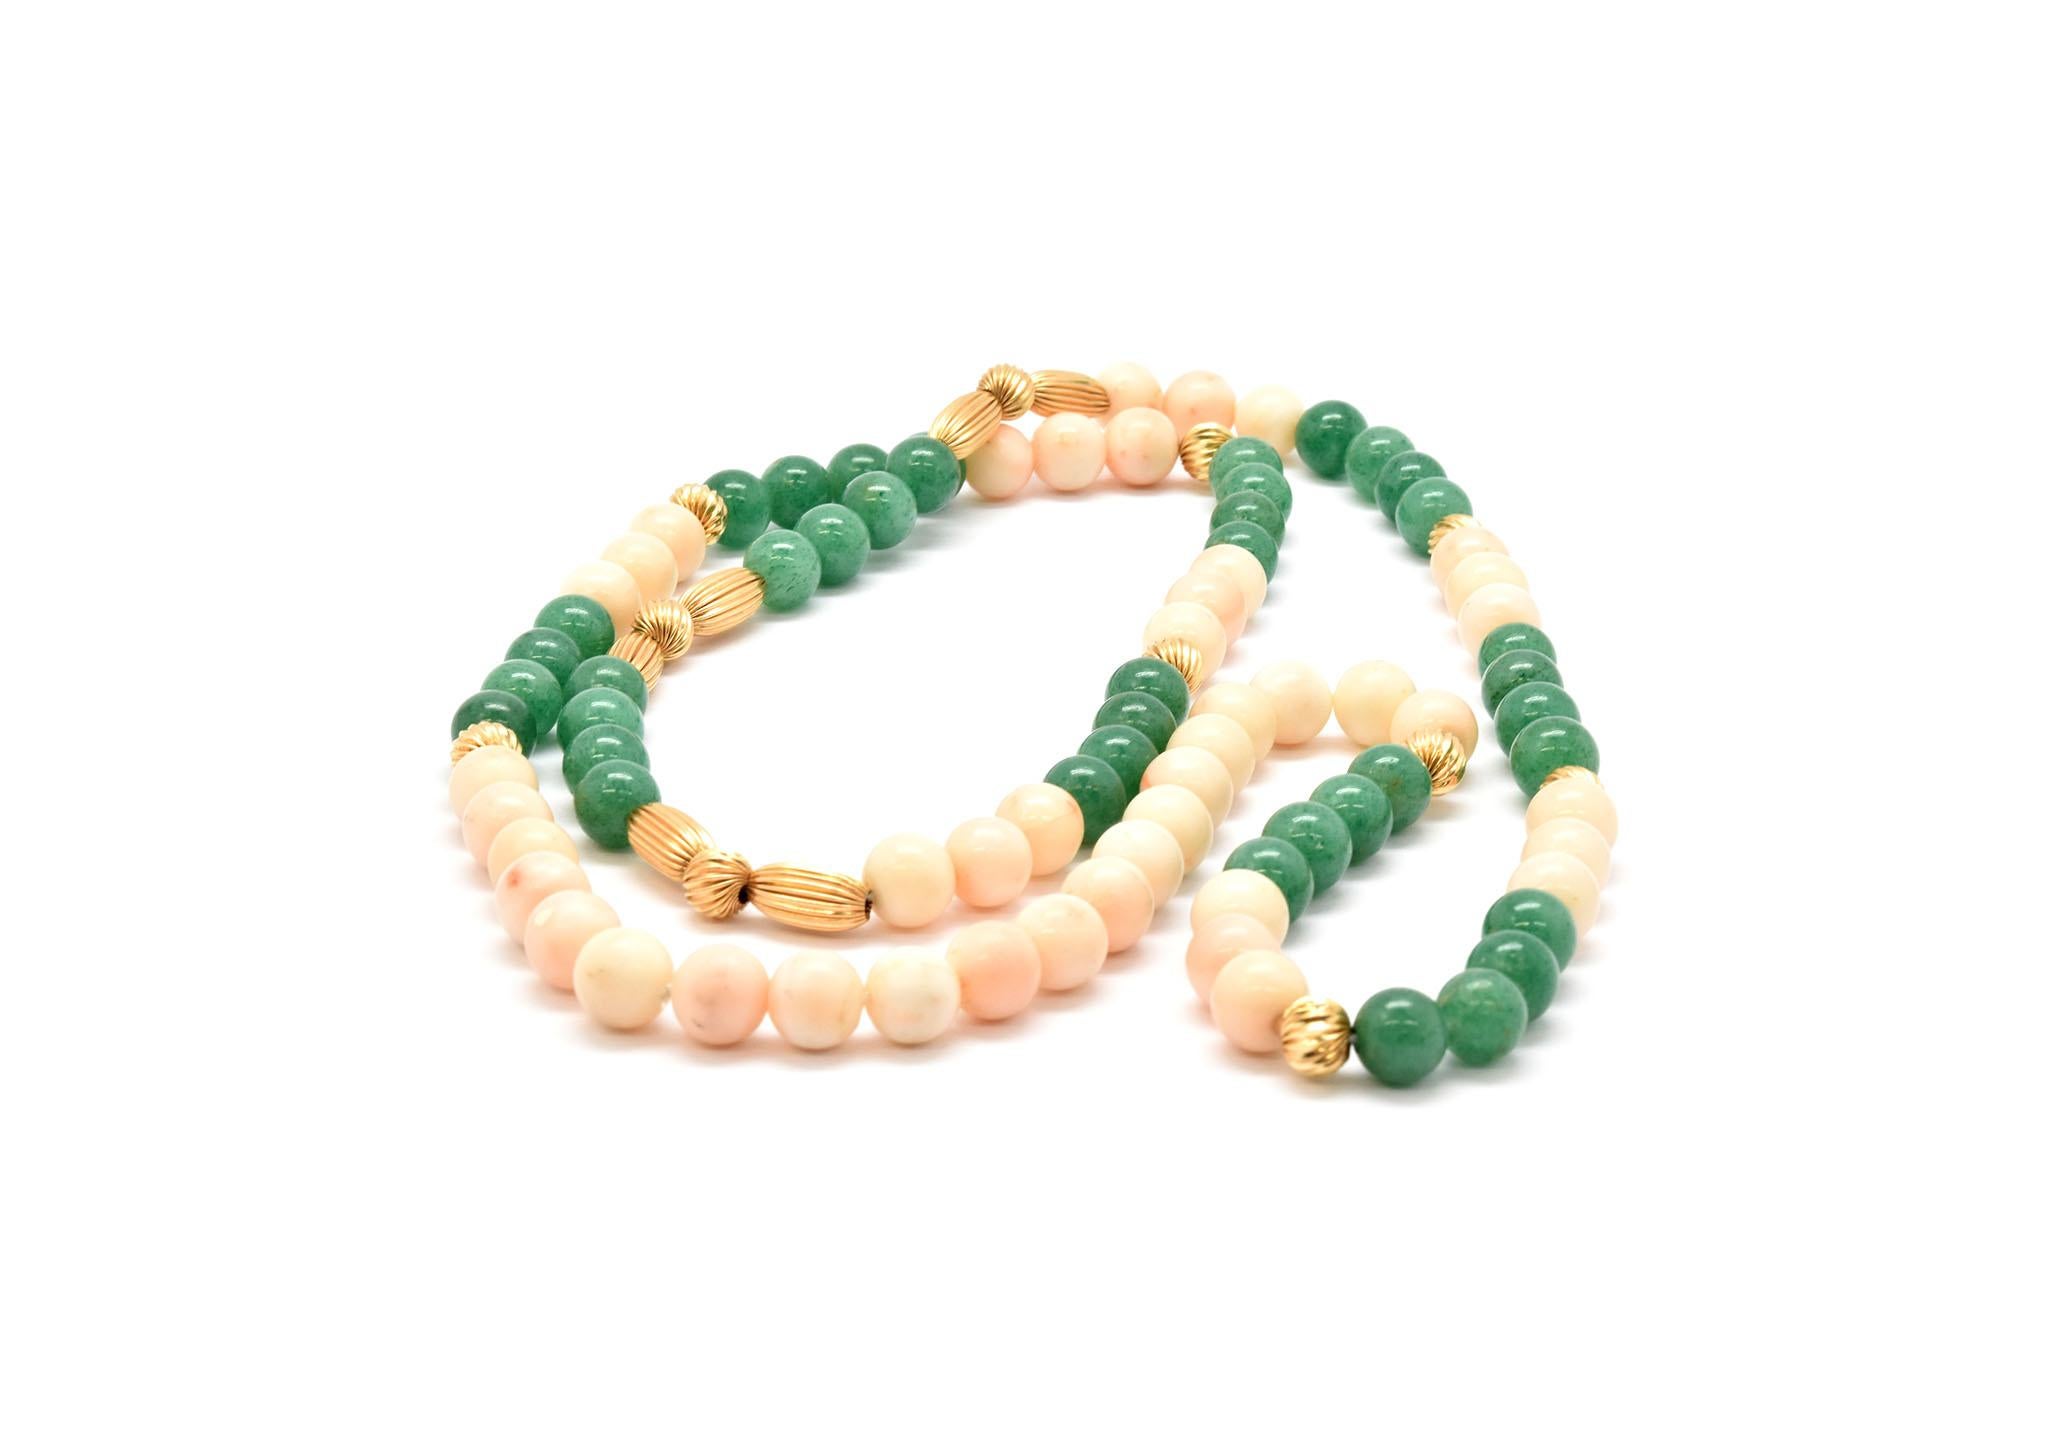 This strand of beads features both pink coral and green jade with 14k yellow gold accent beads. The beads measure about 9mm in diameter, and the necklace measures 34 inches in length.